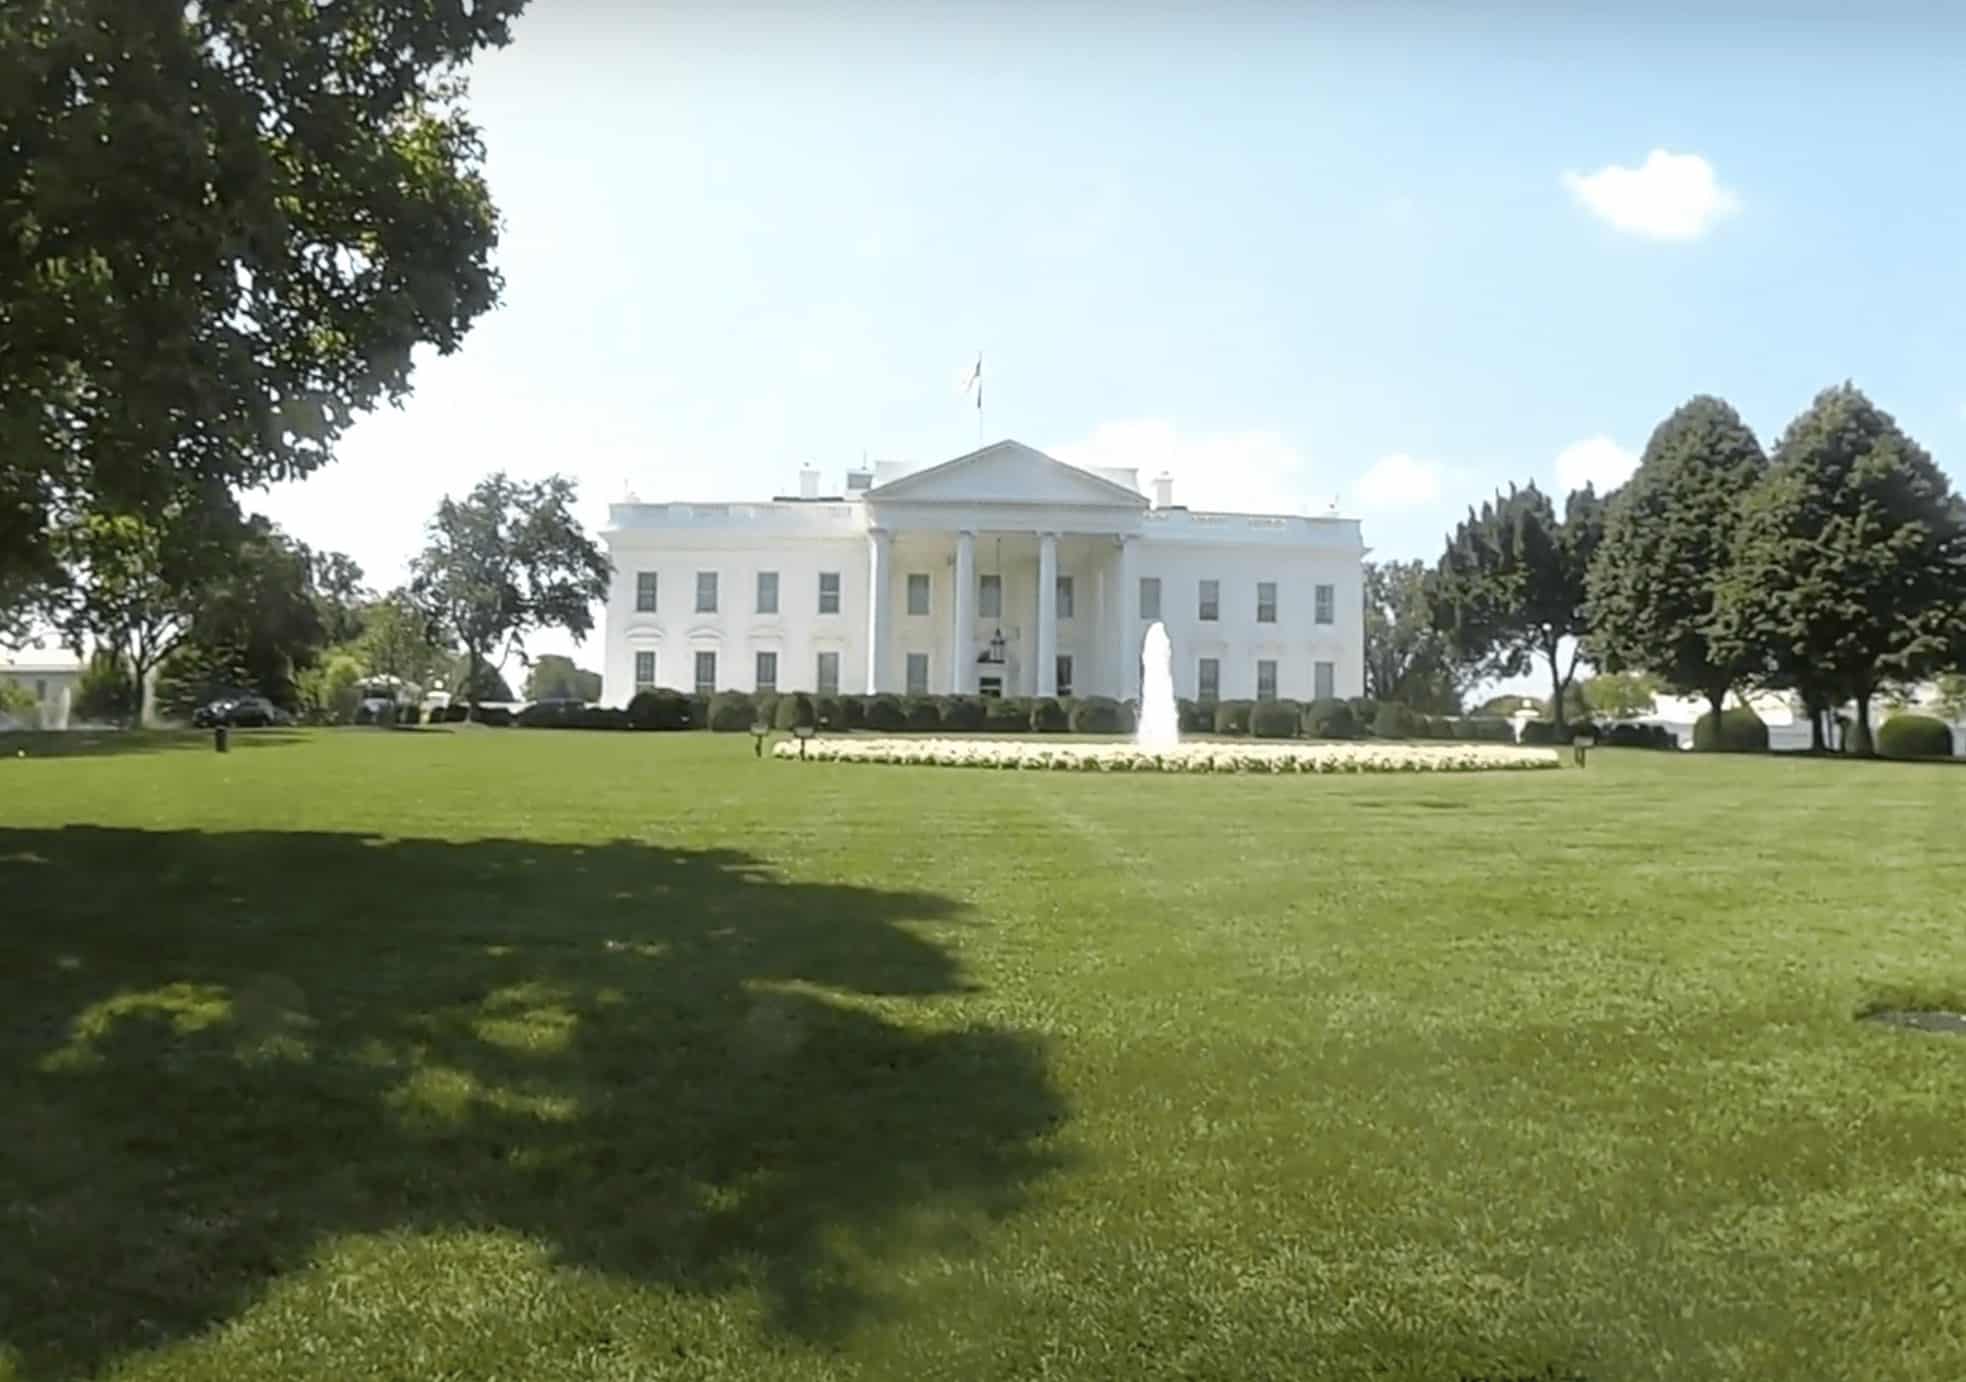 How to Get White House Public Tour Tickets